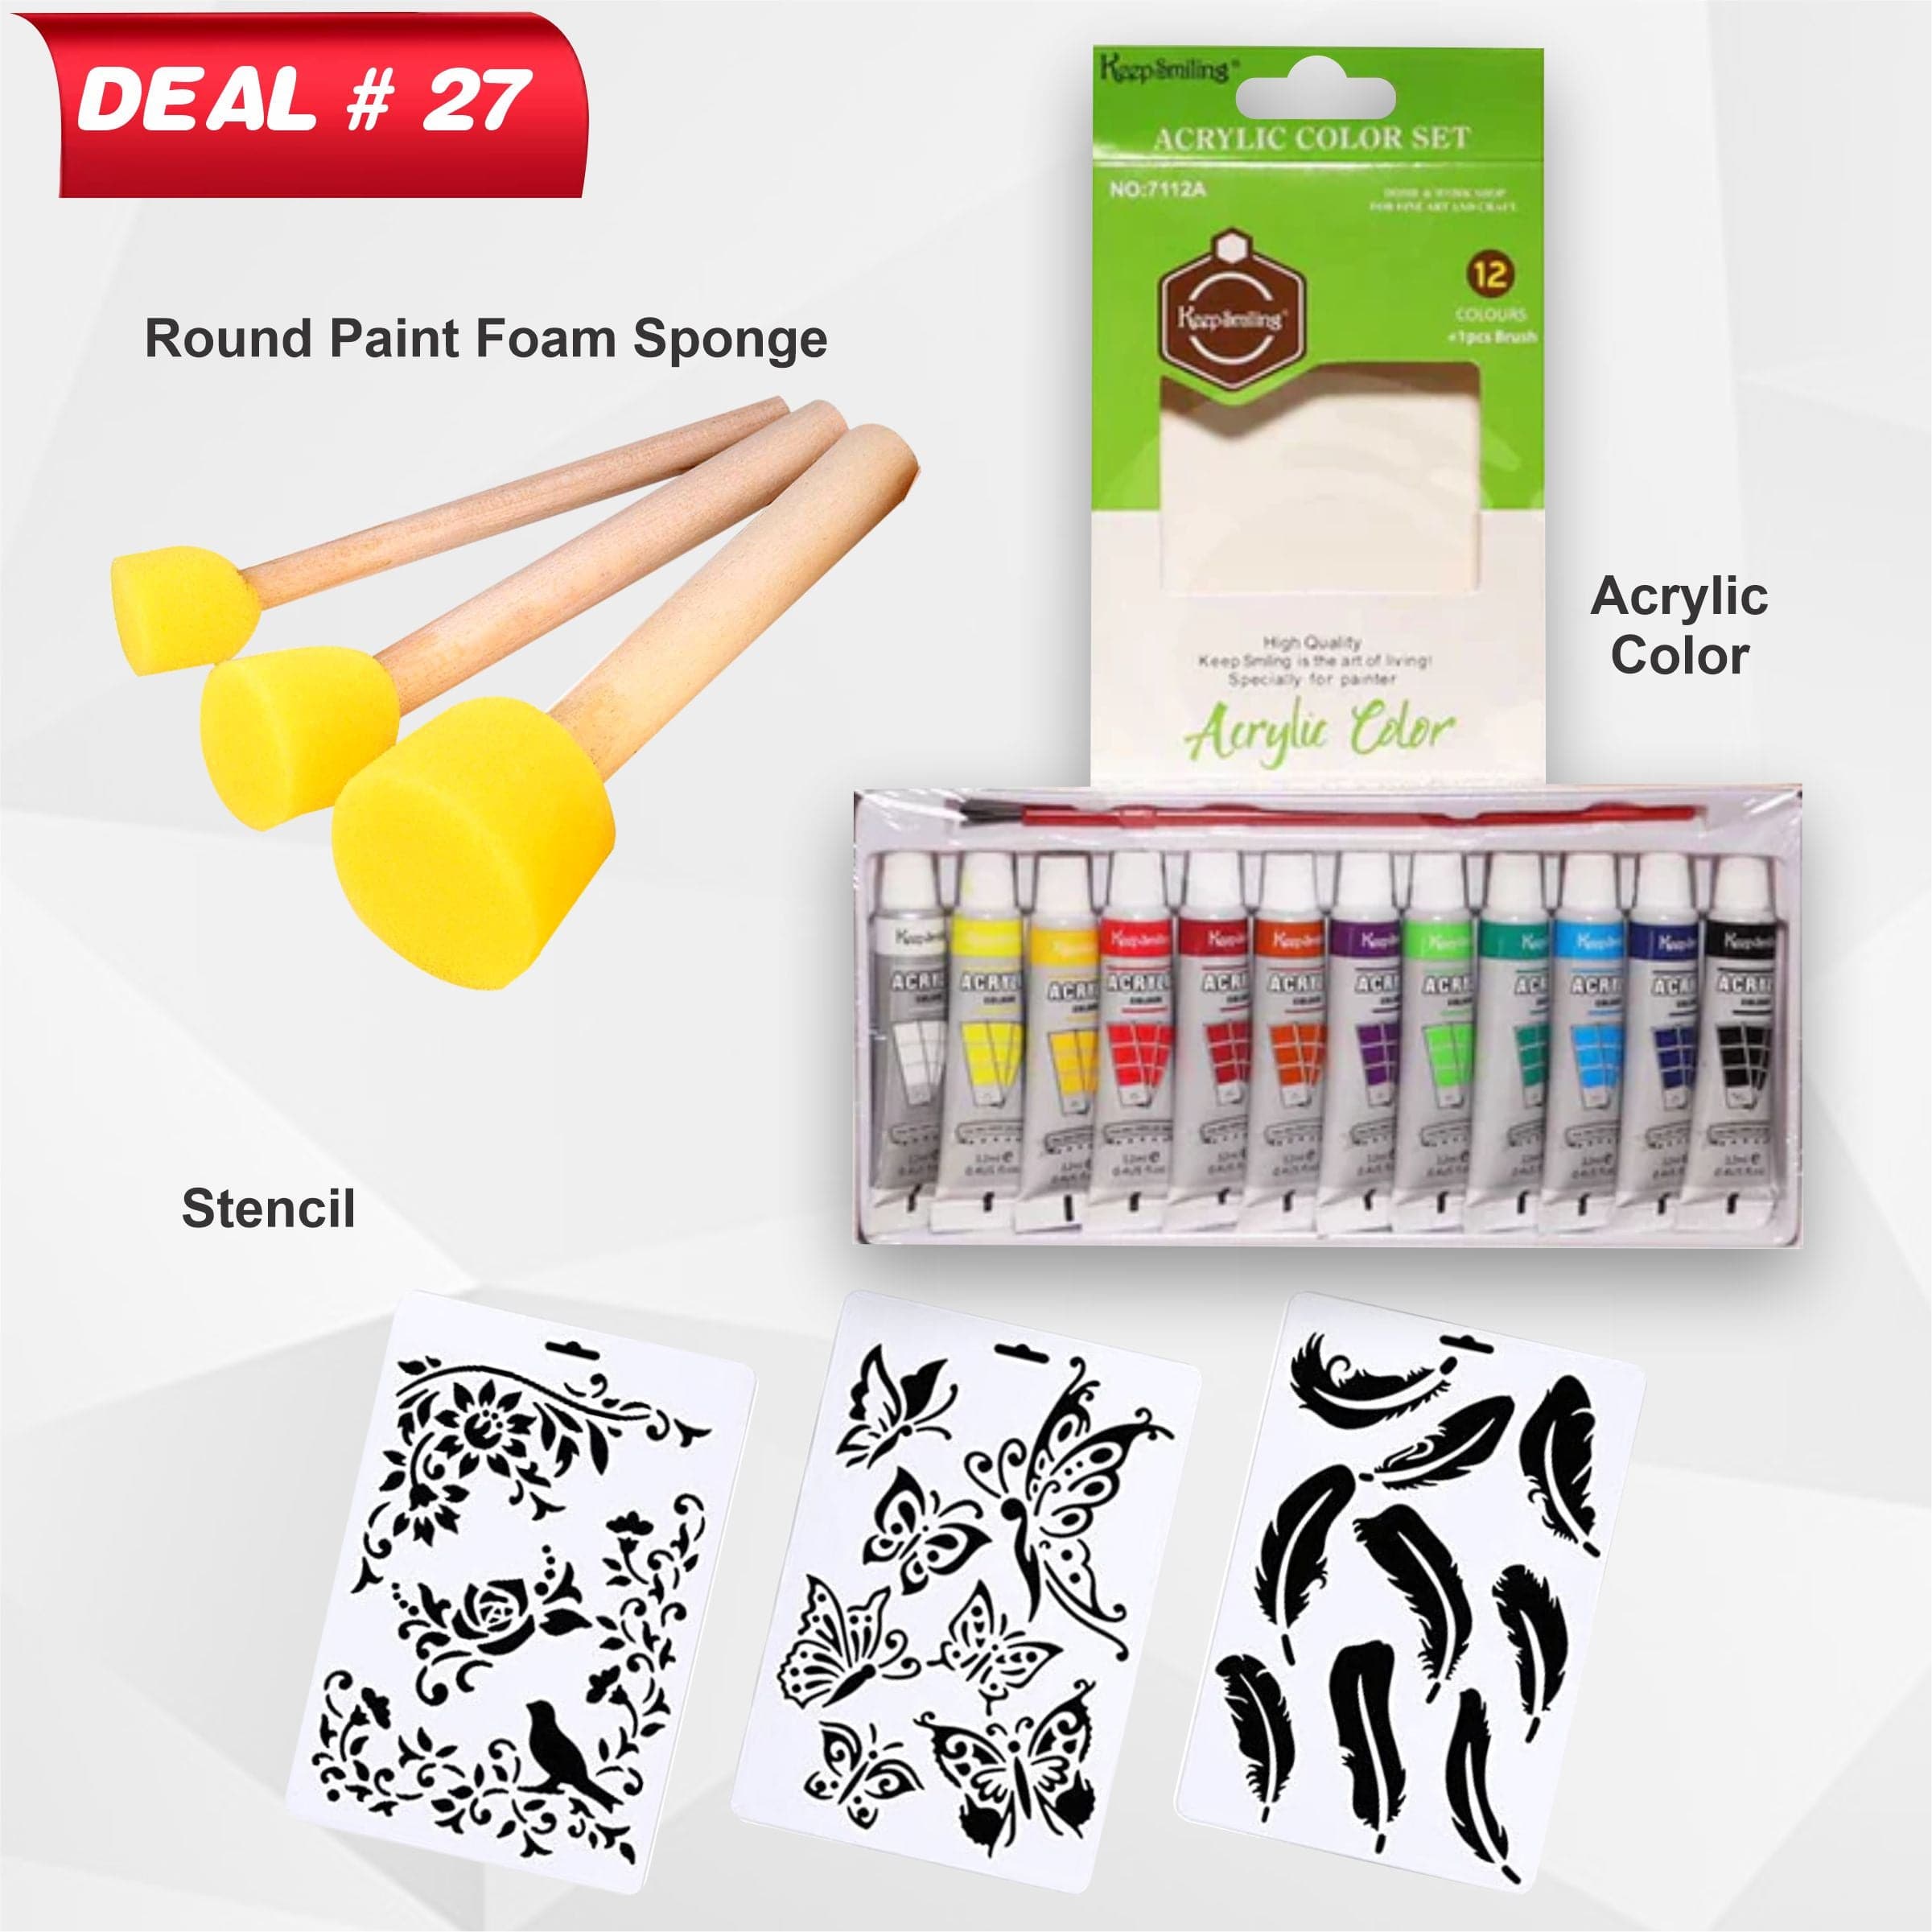 Creative Acrylic Painting Deal No. 27